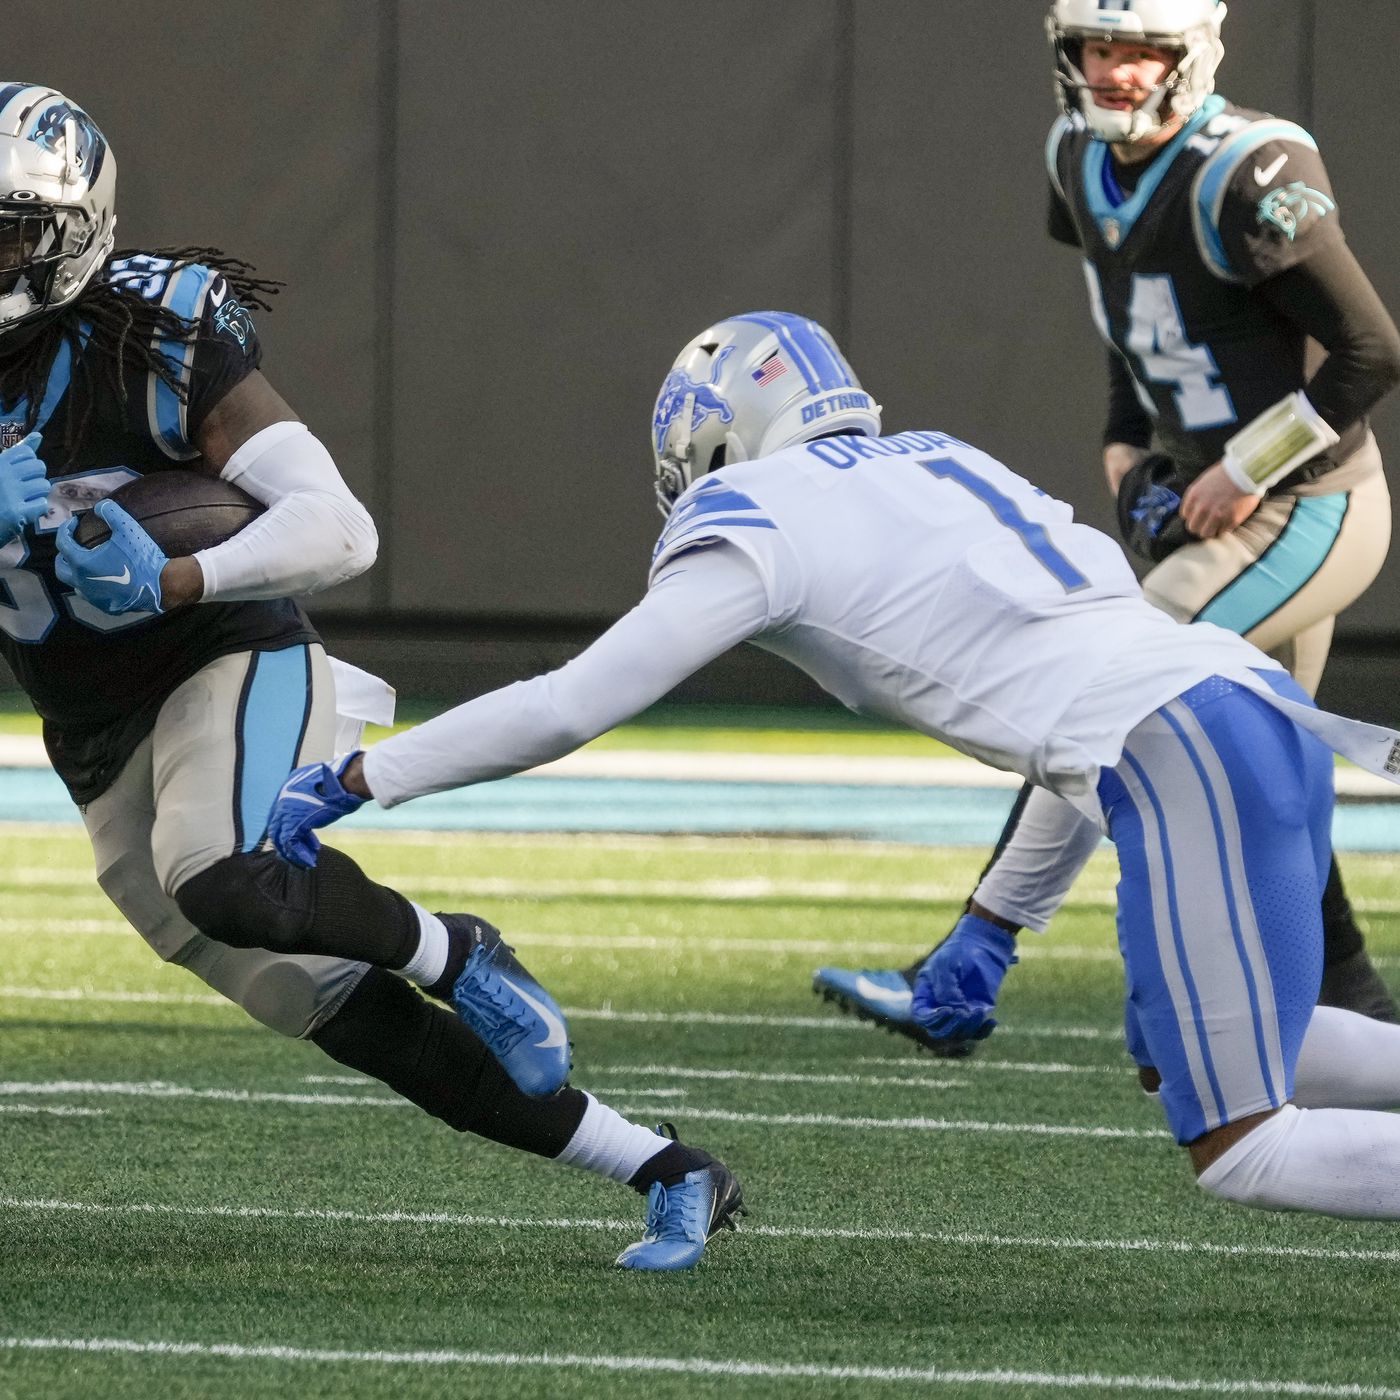 Detroit Lions Spread To Snap Record-Setting NFL Streak